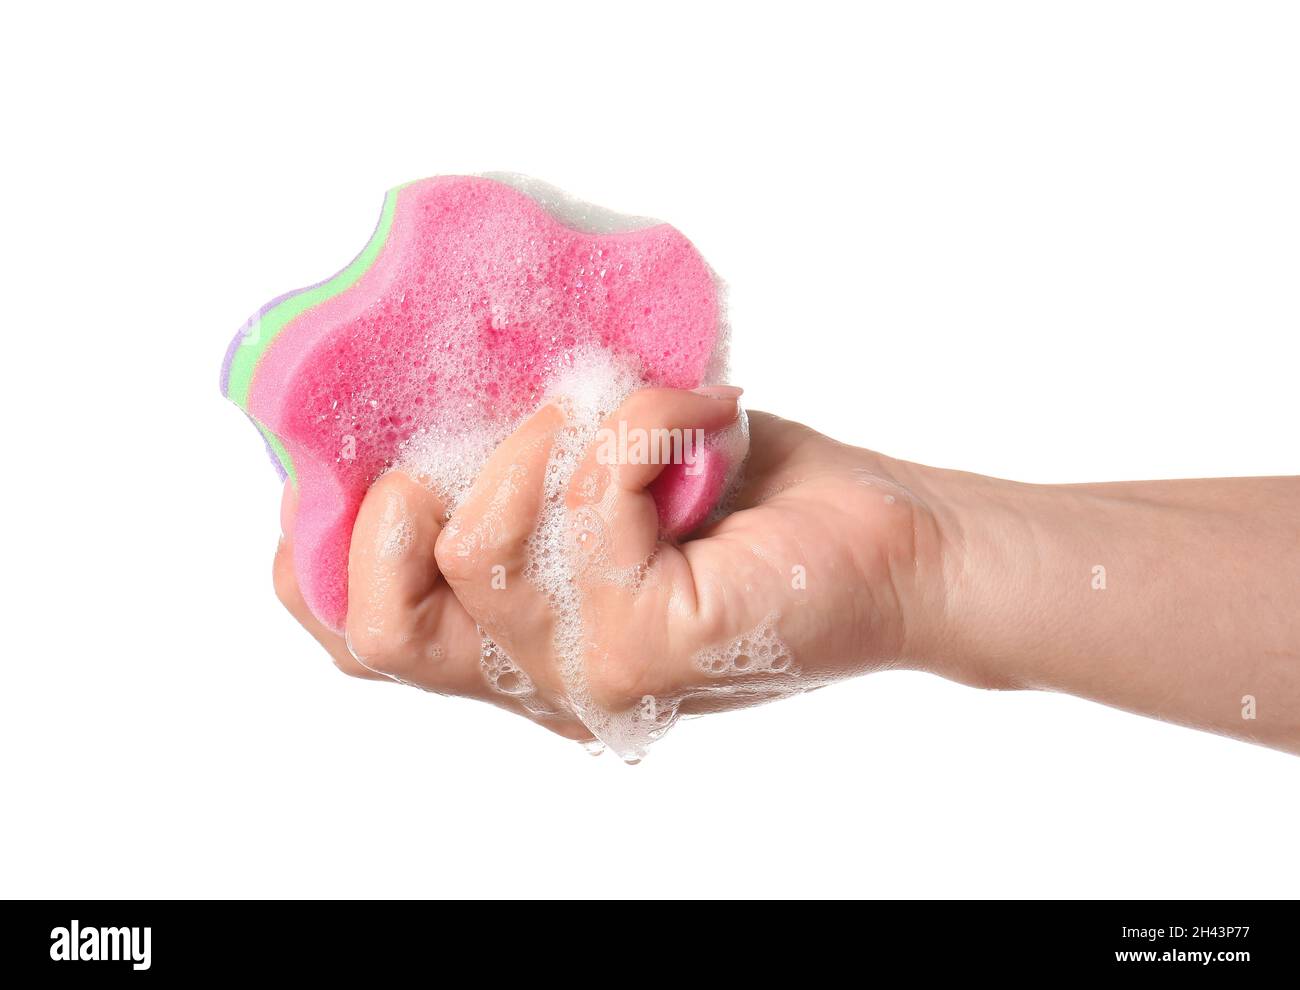 Squeezing Wet Sponge Cut Out Stock Images Pictures Alamy